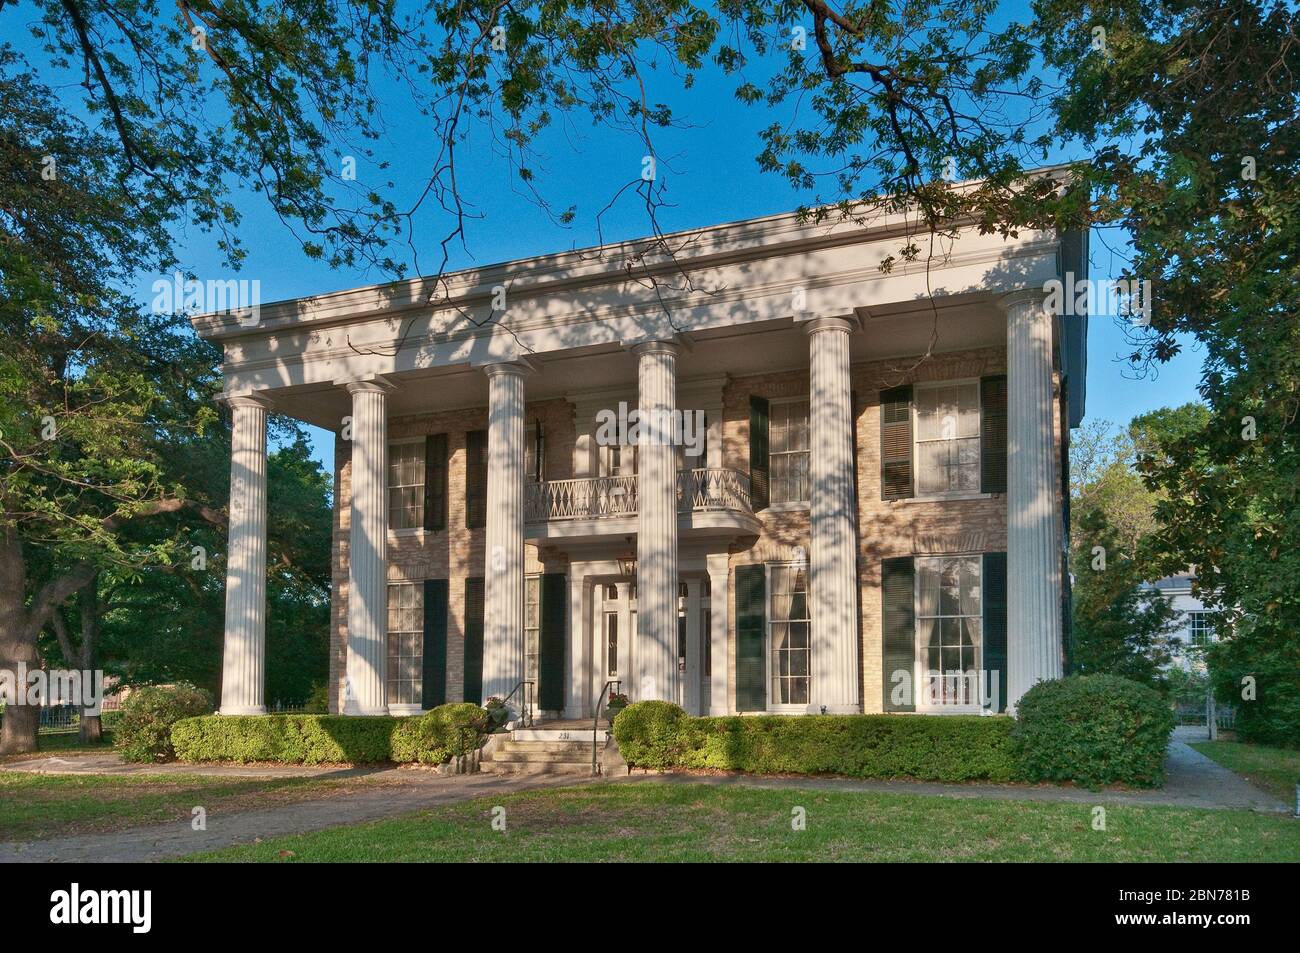 Neill-Cochran Museum House, in Greek Revival style with Doric columns, in Austin, Texas, USA Stock Photo